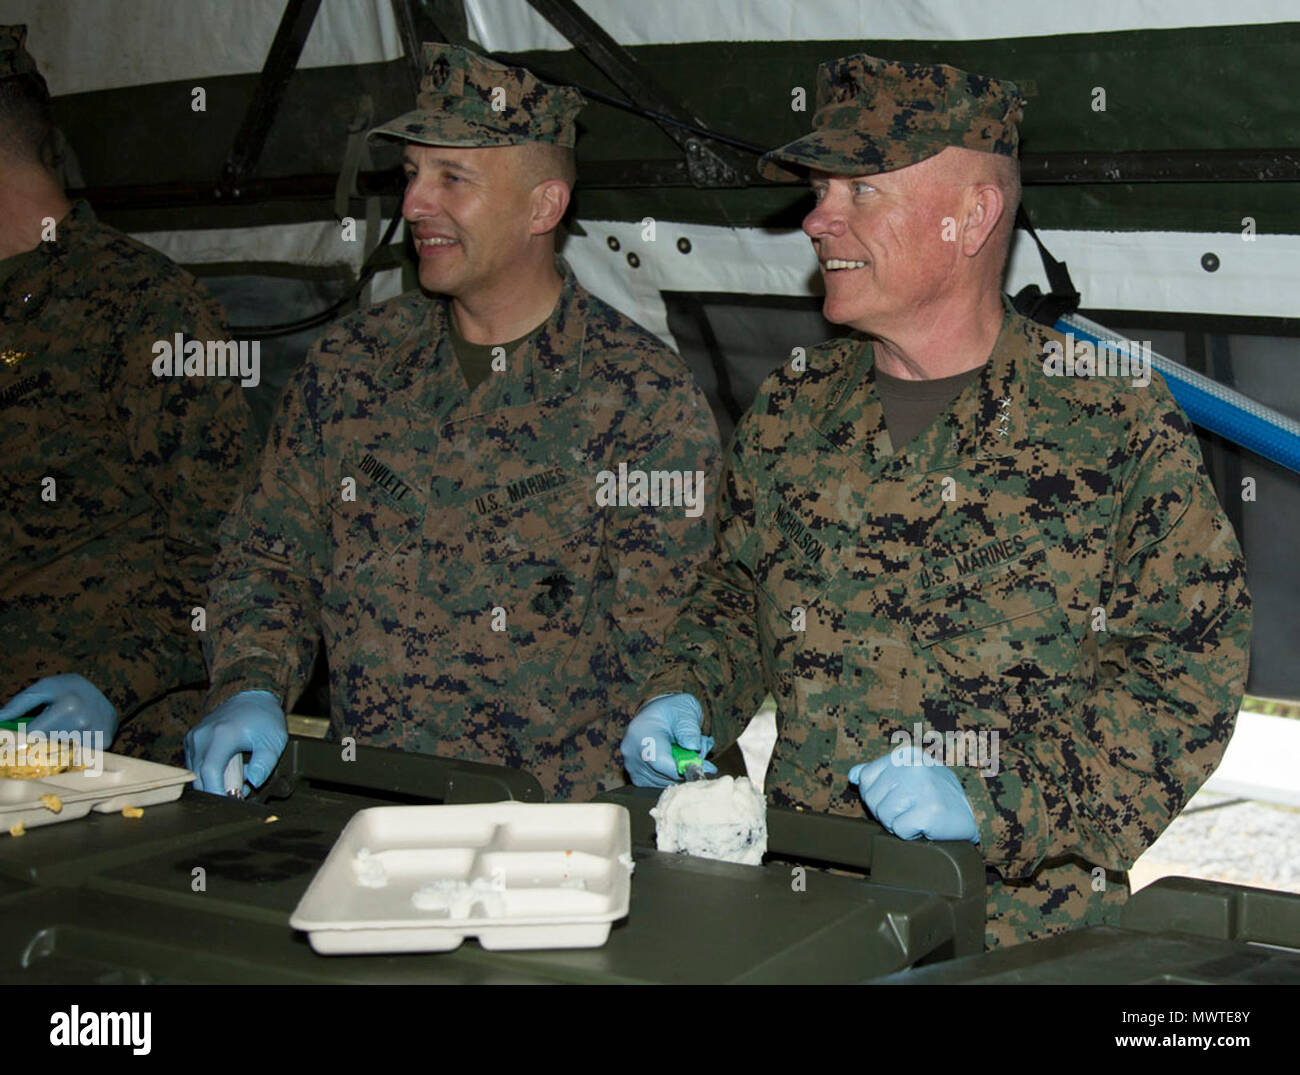 U.S. Marine Corps (left) Col. Brian M. Howlett, the Camp Commander at Camp Hansen, (right) Lt. Gen. Lawrence Nicholson, the Okinawa Area and III Marine Expeditionary Force Commanding General with III Marine Headquarters Group (III MHG), serves chow to service members during Marine Expeditionary Force Exercise 2017(MEFEX 17) at Range GP 304 on Marine Corps Base Camp Hansen, Okinawa, Japan, April 27, 2017. MEFEX 17, a command and control exercise conducted in a simulated deployed environment, is designed to synchronize and bring to bear the full spectrum of III MEF, while remaining ready to prov Stock Photo